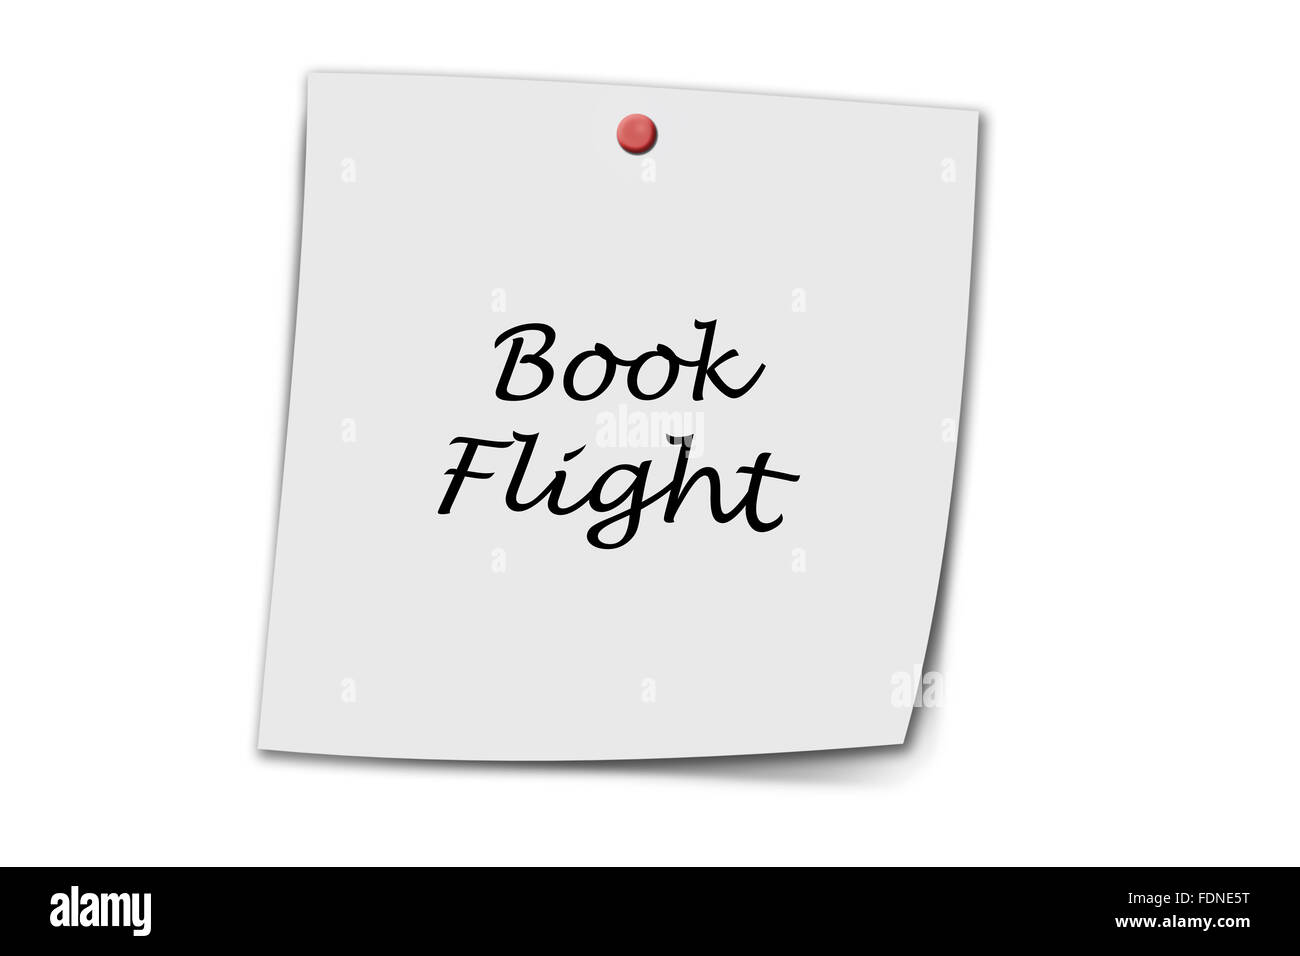 Book FLight written on a memo isolated on white background Stock Photo